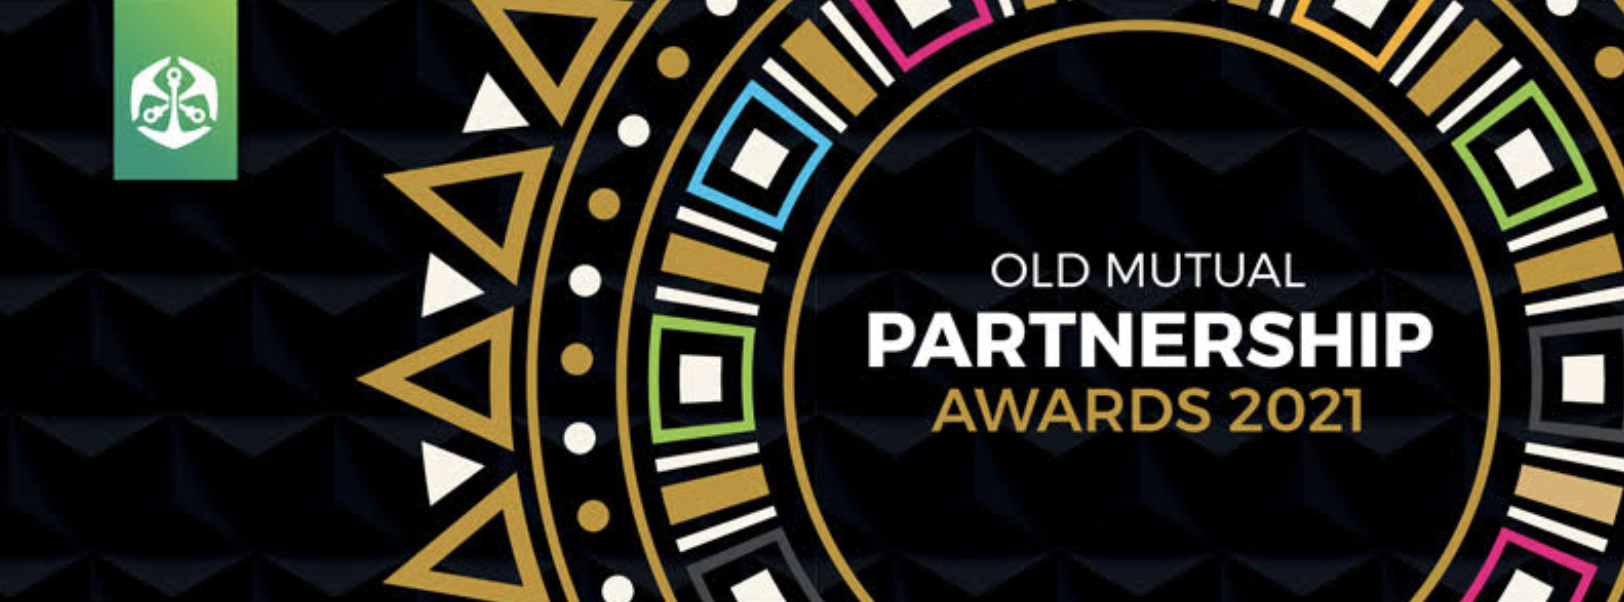 hearX Group is proud to have been recognised as a top 18 finalist for the 2021 Old Mutual Partnership Awards